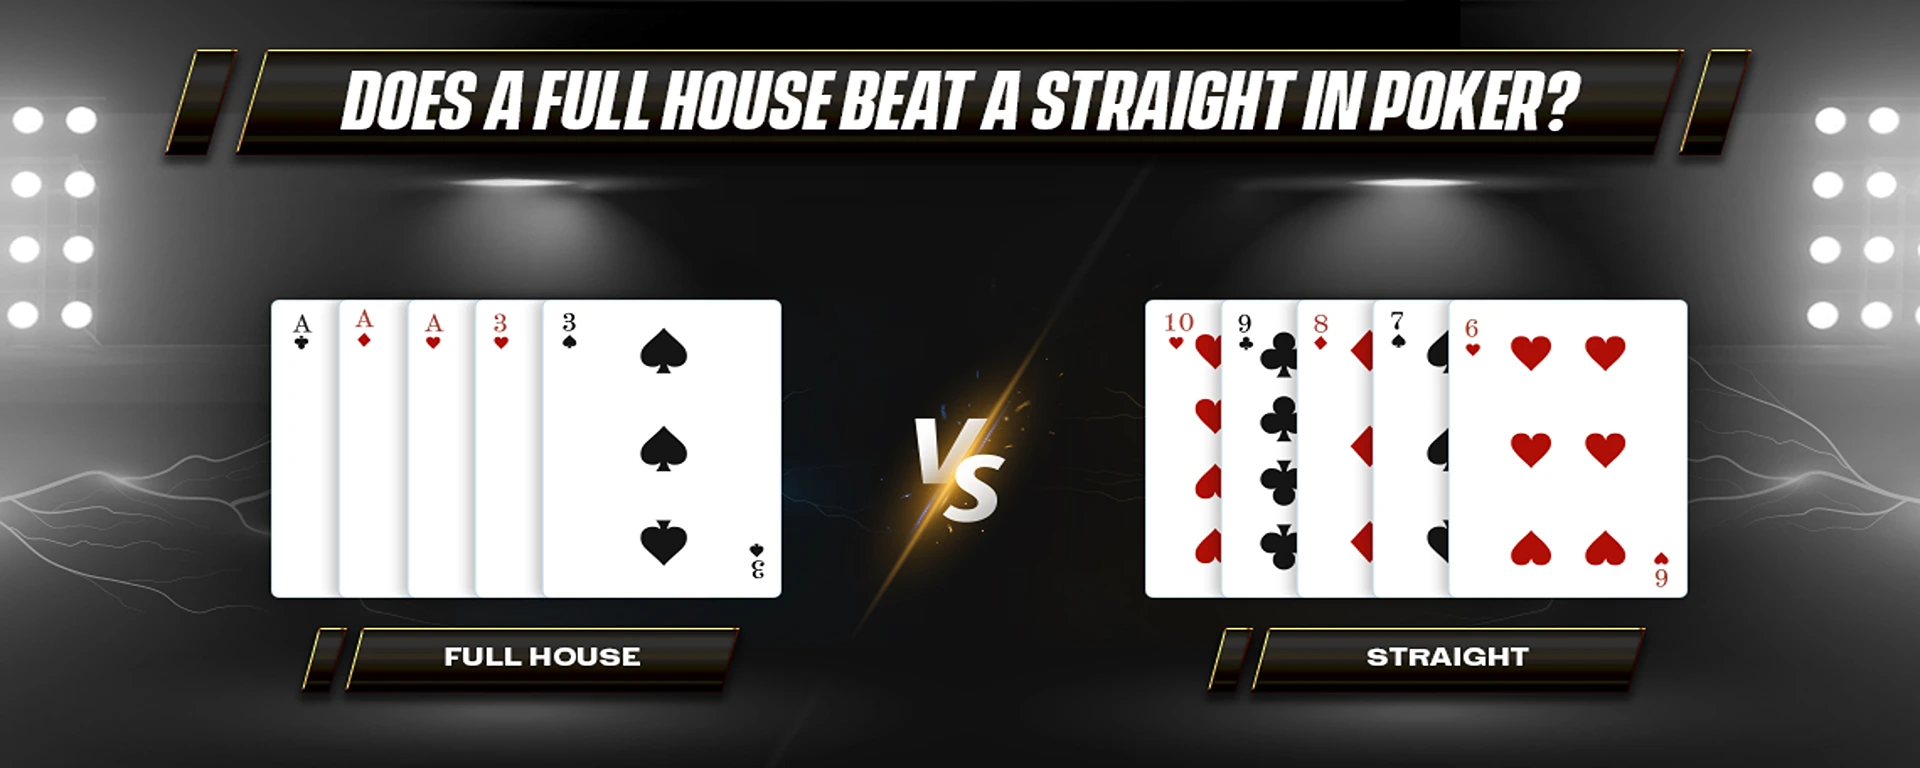 Does a Straight Beat a Full House?